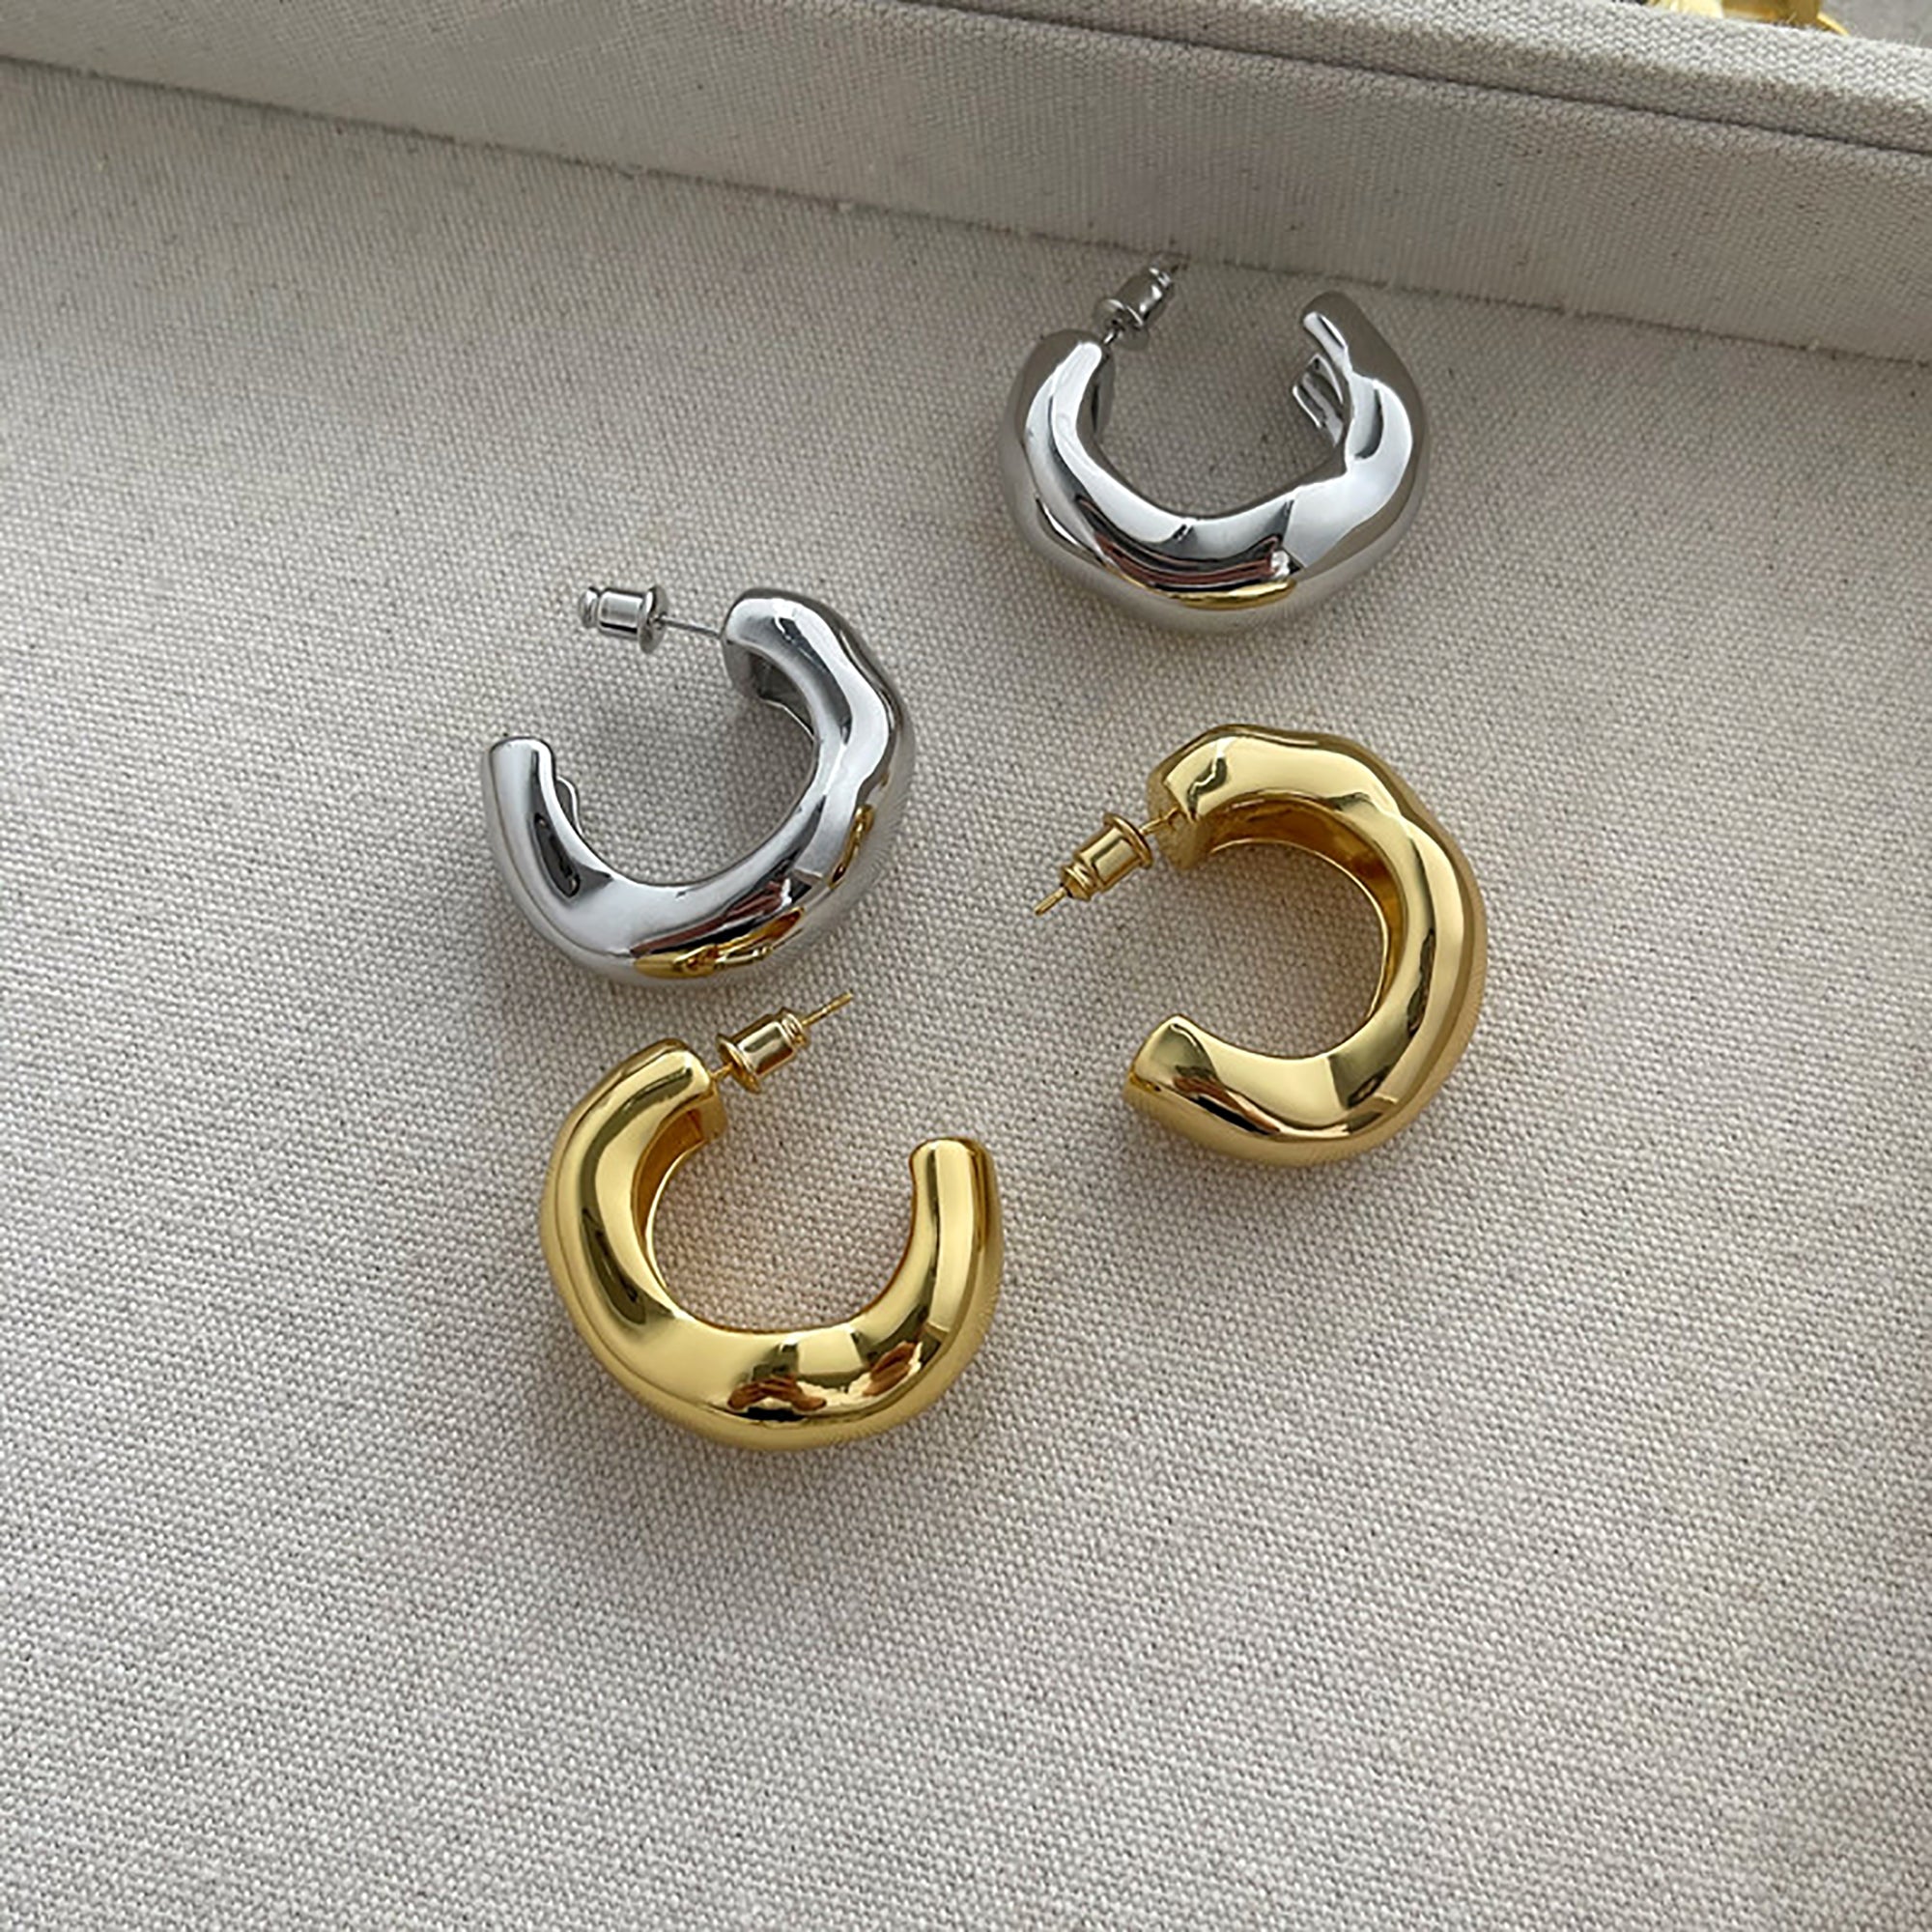 Gold Plated Chunky Hoop Earrings Gift wedding influencer styling KOL / Youtuber / Celebrity / Fashion Icon